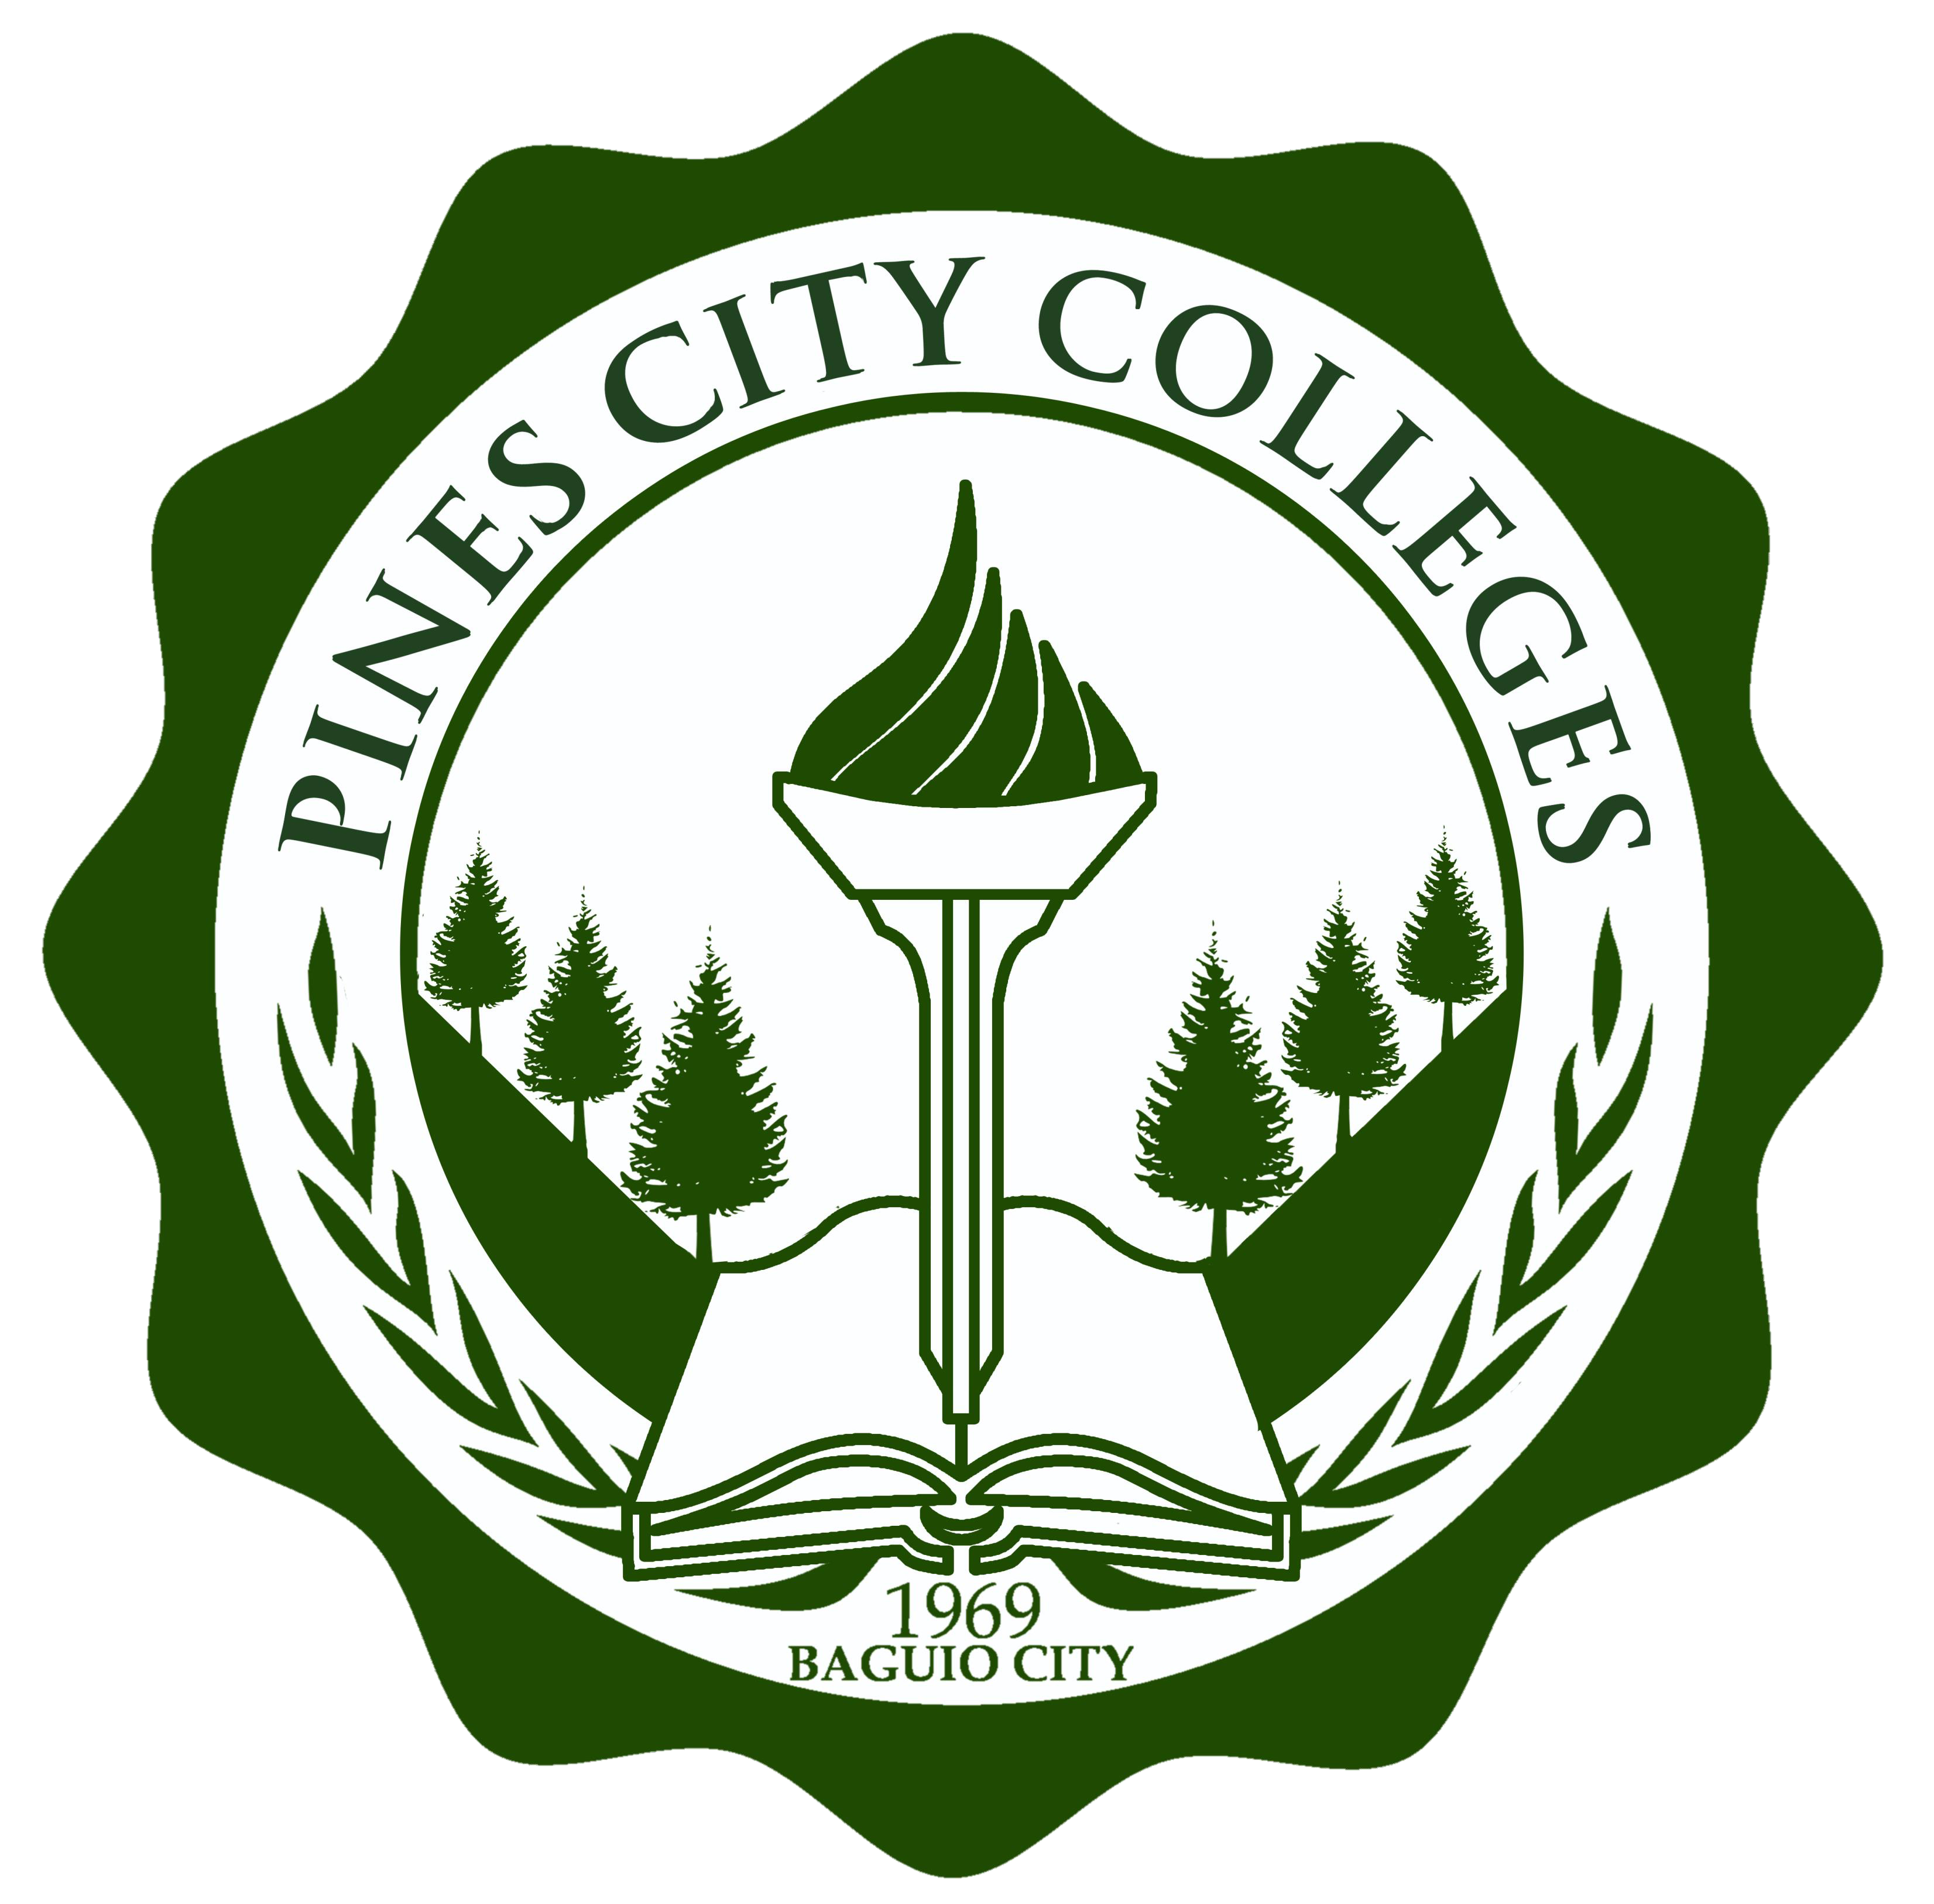 PINES CITY COLLEGES